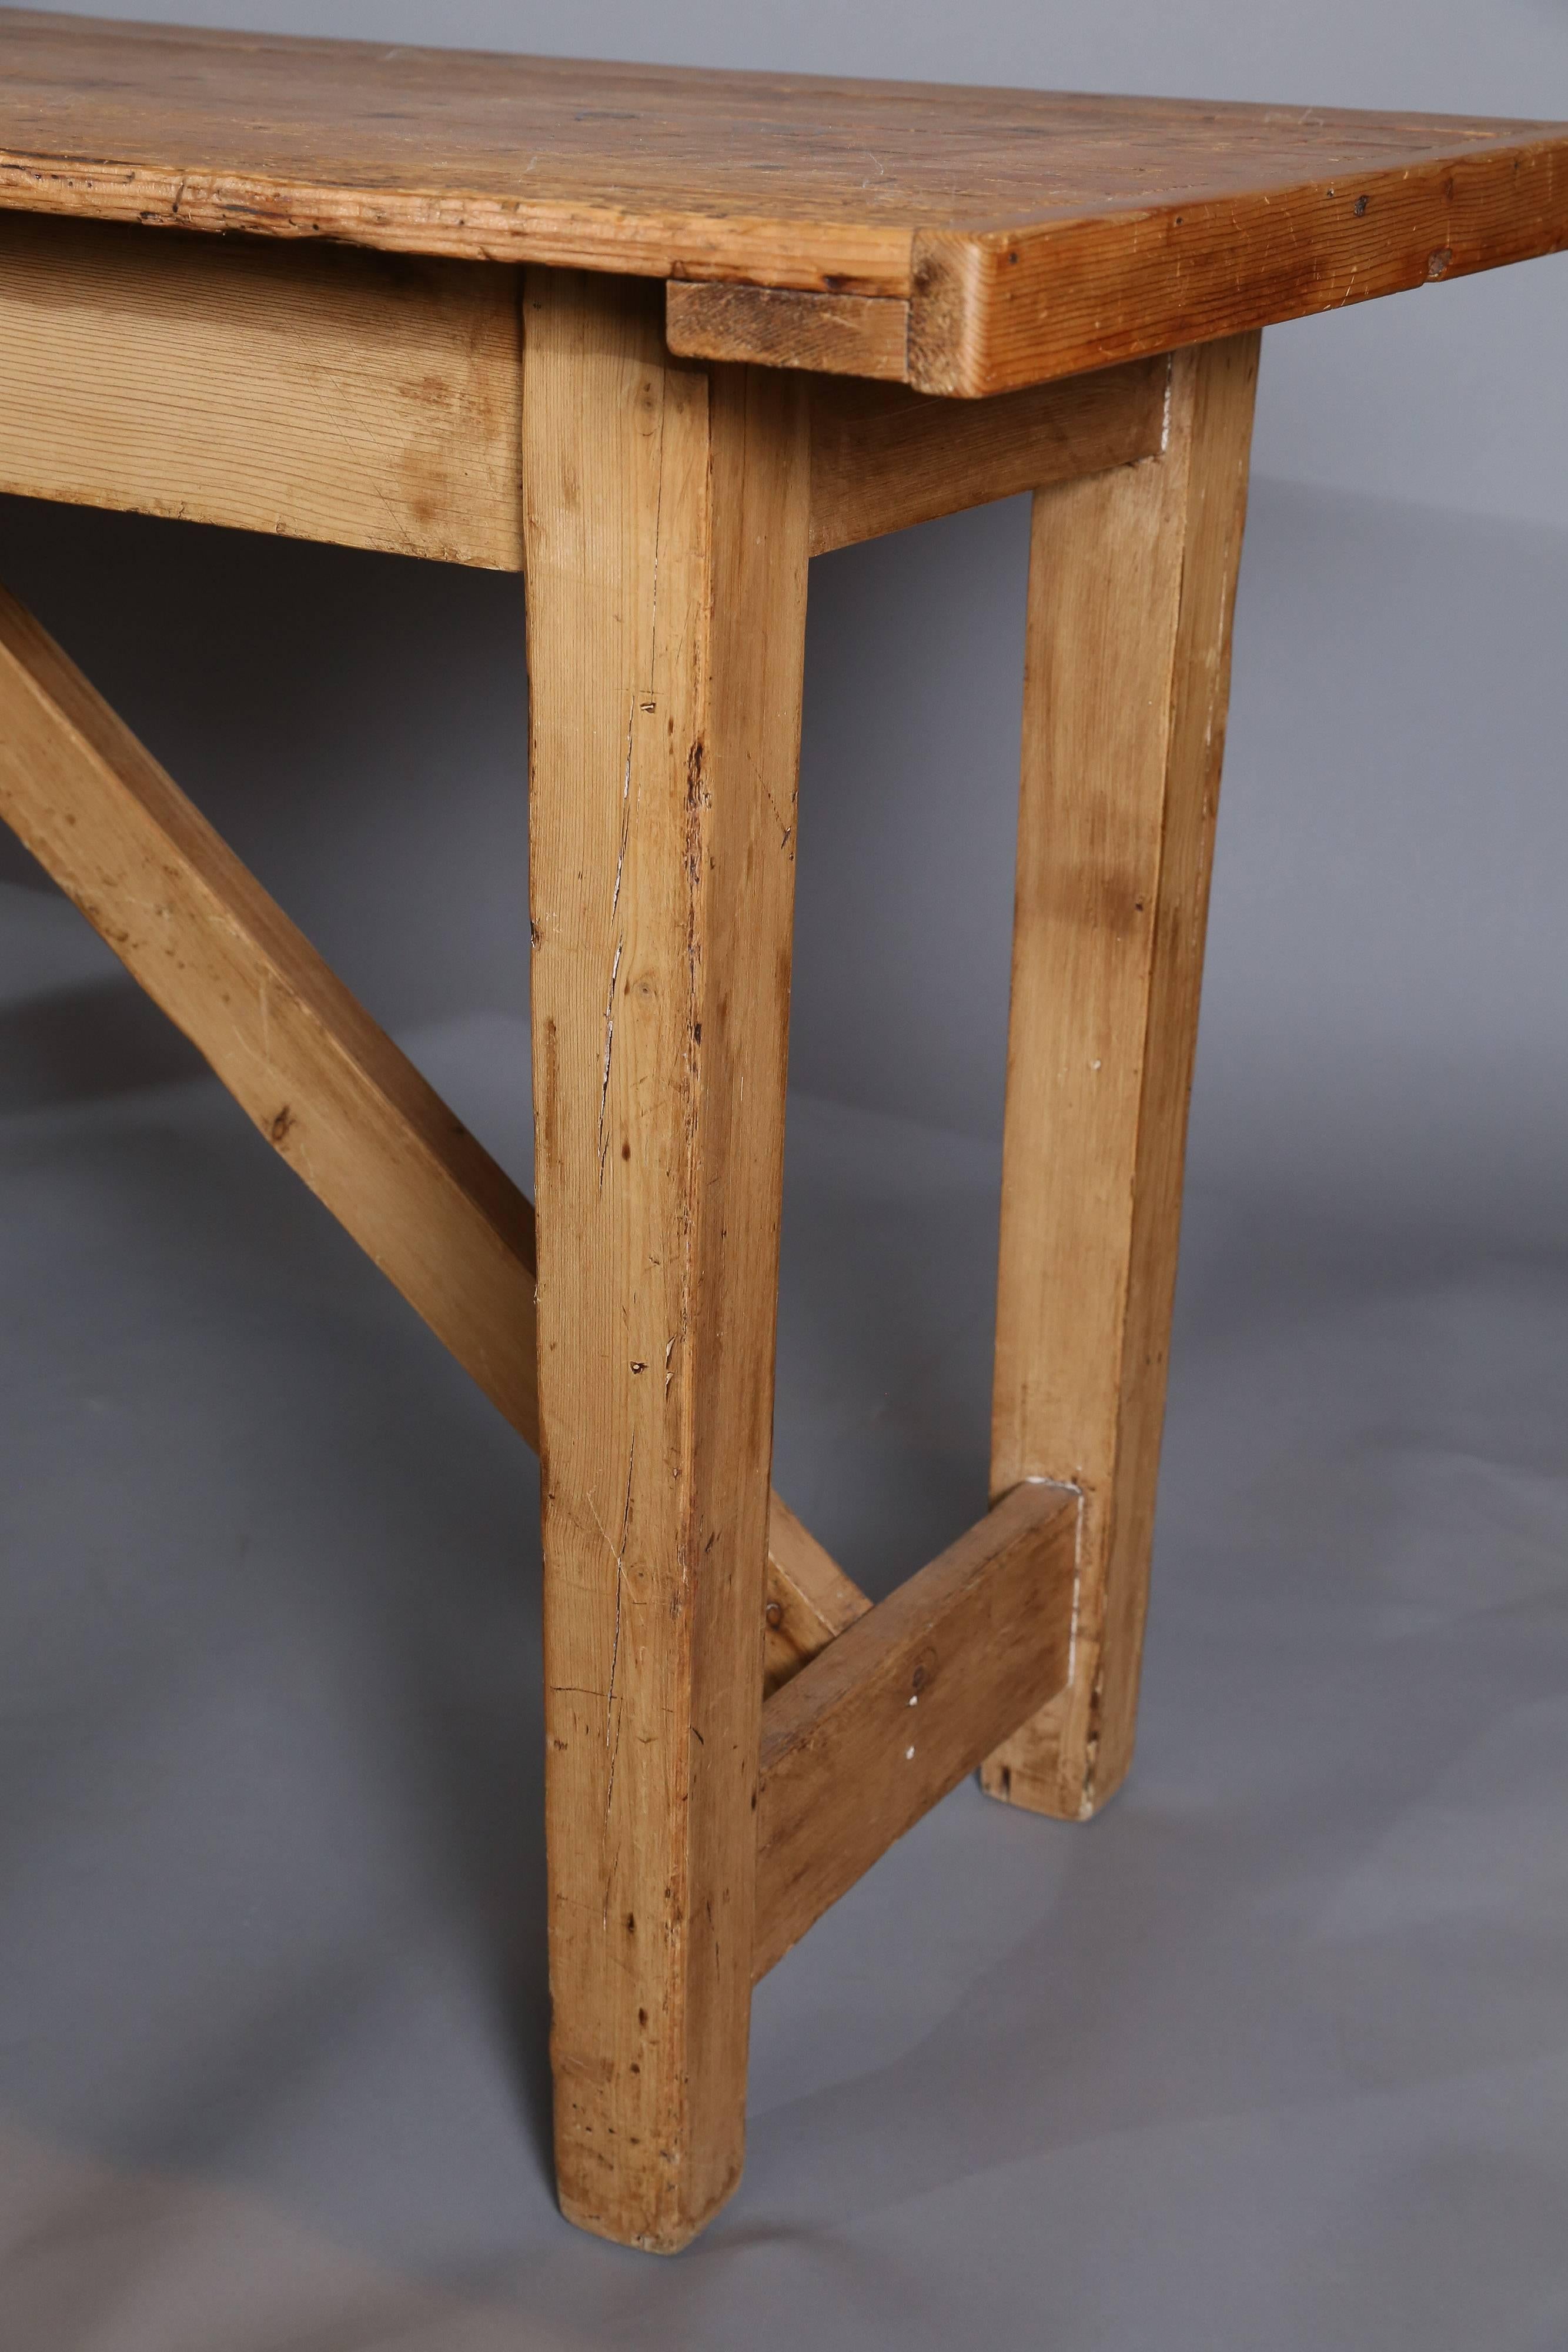 Country Antique Rustic Pine Worktable or Console with Trestle Base